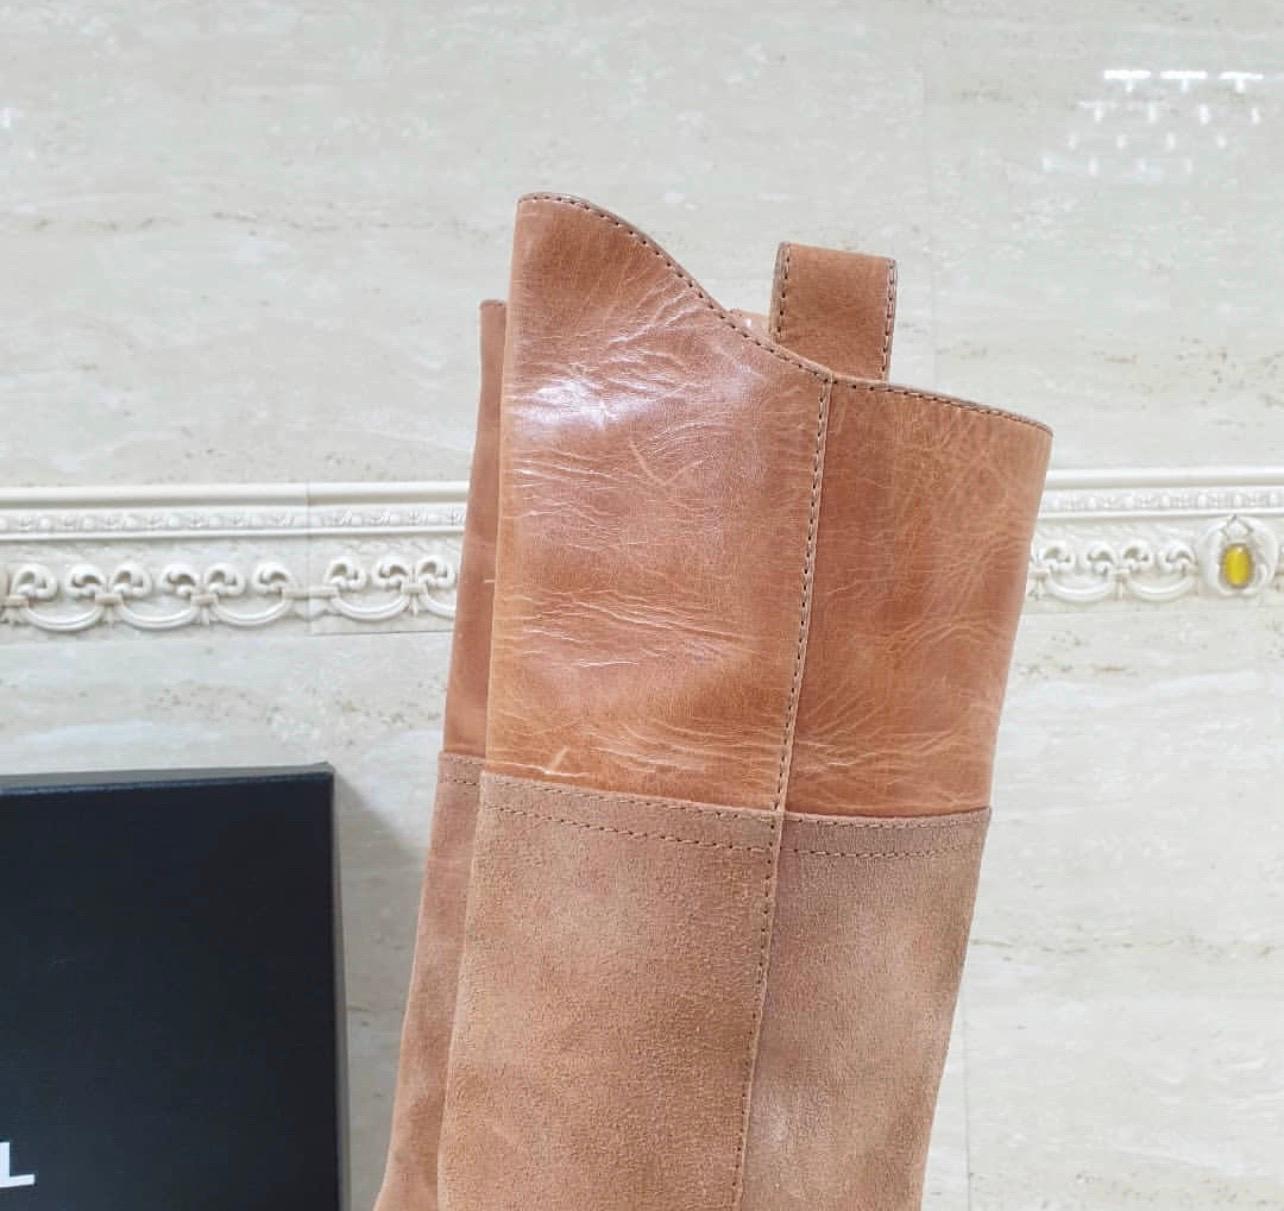 Chanel Paris-Dallas Mid-Calf Boots



Caramel textured suede and leather Chanel Paris-Dallas square-toe mid-calf boots with interlocking CC embroidery at sides and stacked heels. 



Size:38



Condition: very good



No original packaging.